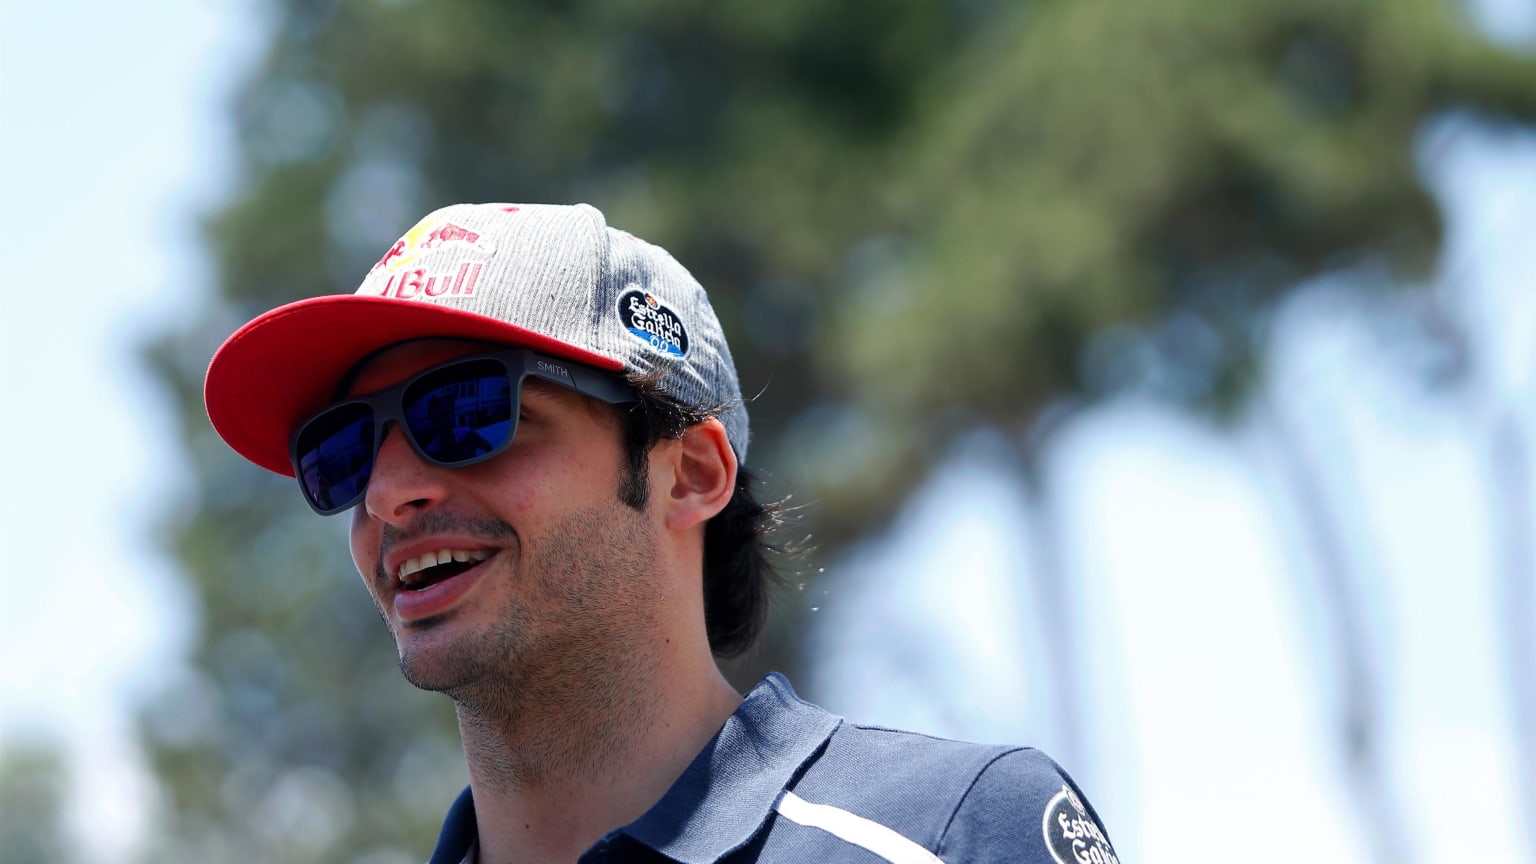 There is only one… Carlos Sainz